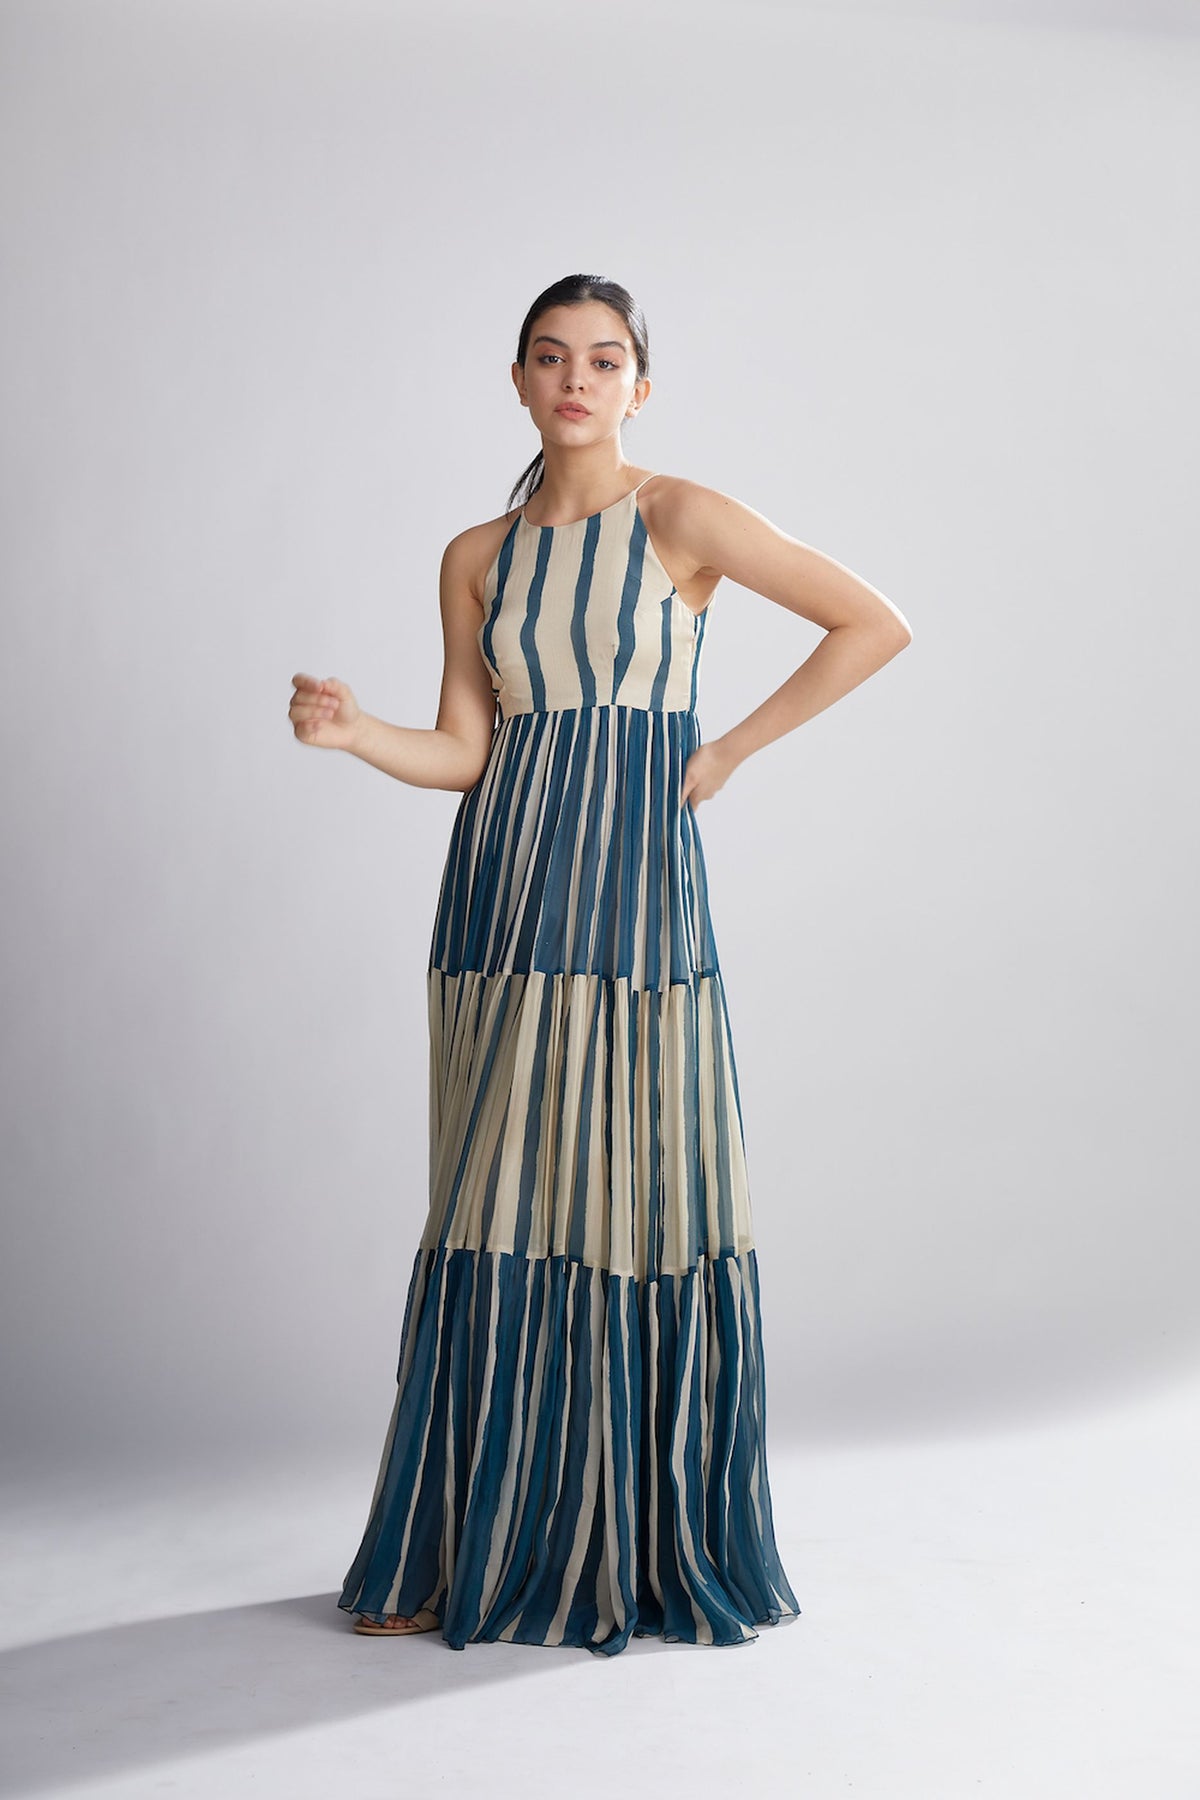 TEAL AND WHITE STRIPE LONG DRESS